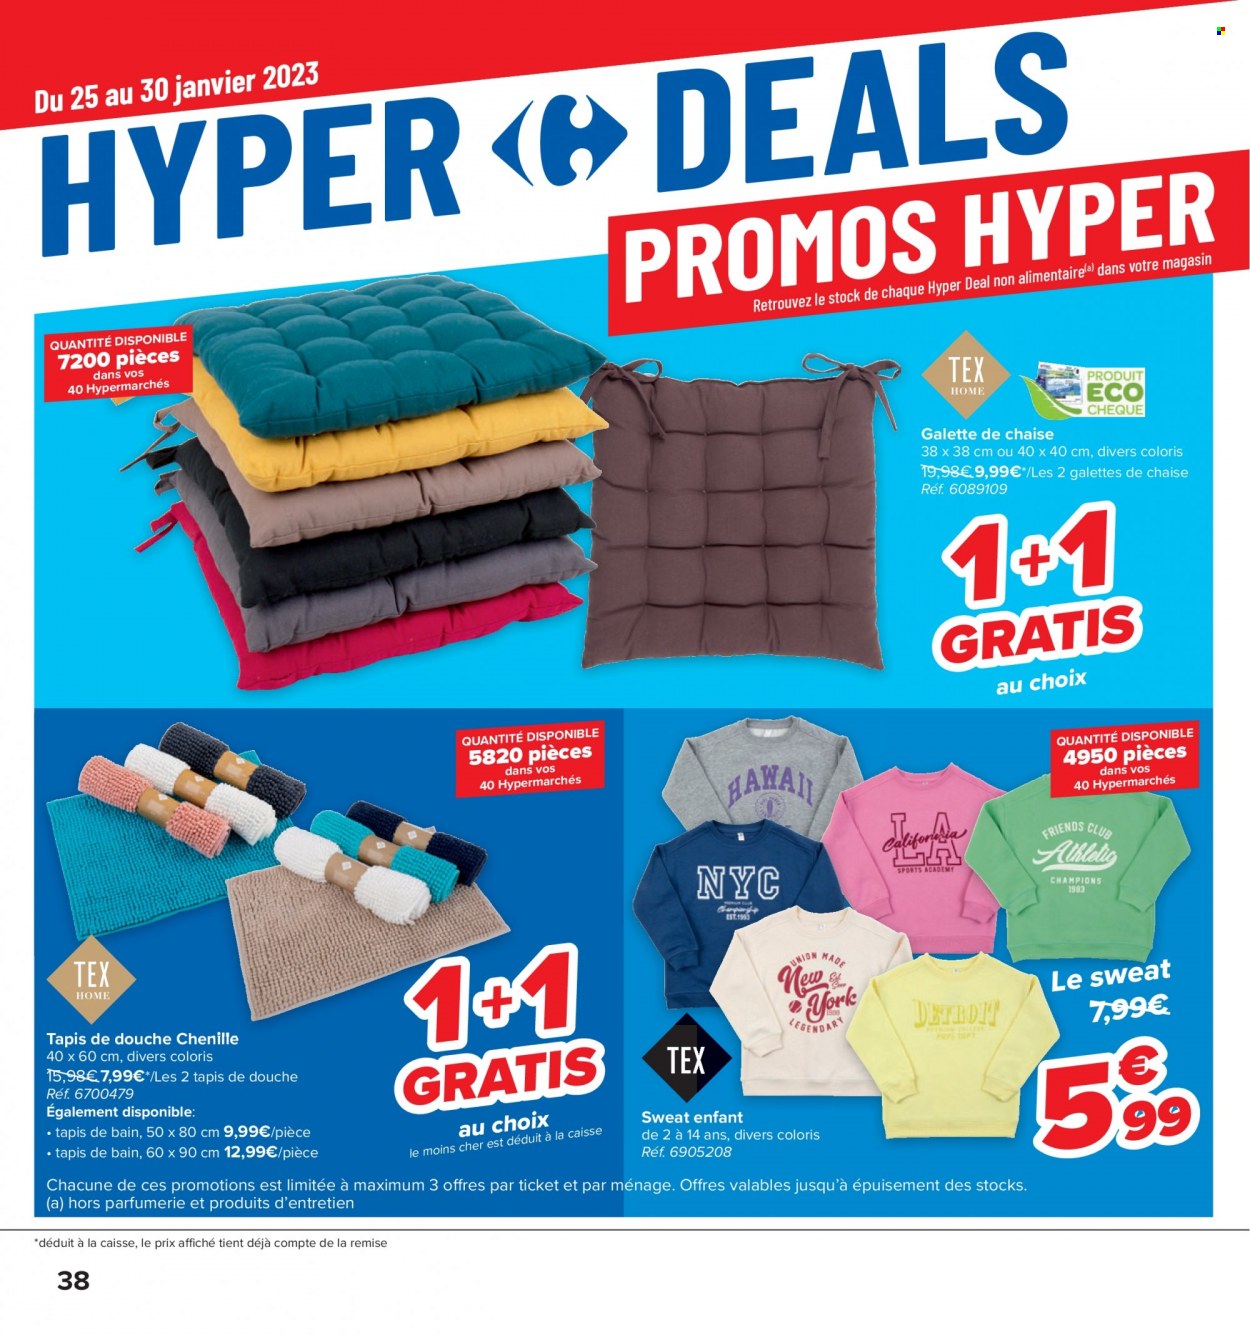 Catalogue Carrefour hypermarkt - 25.1.2023 - 6.2.2023. Page 18.